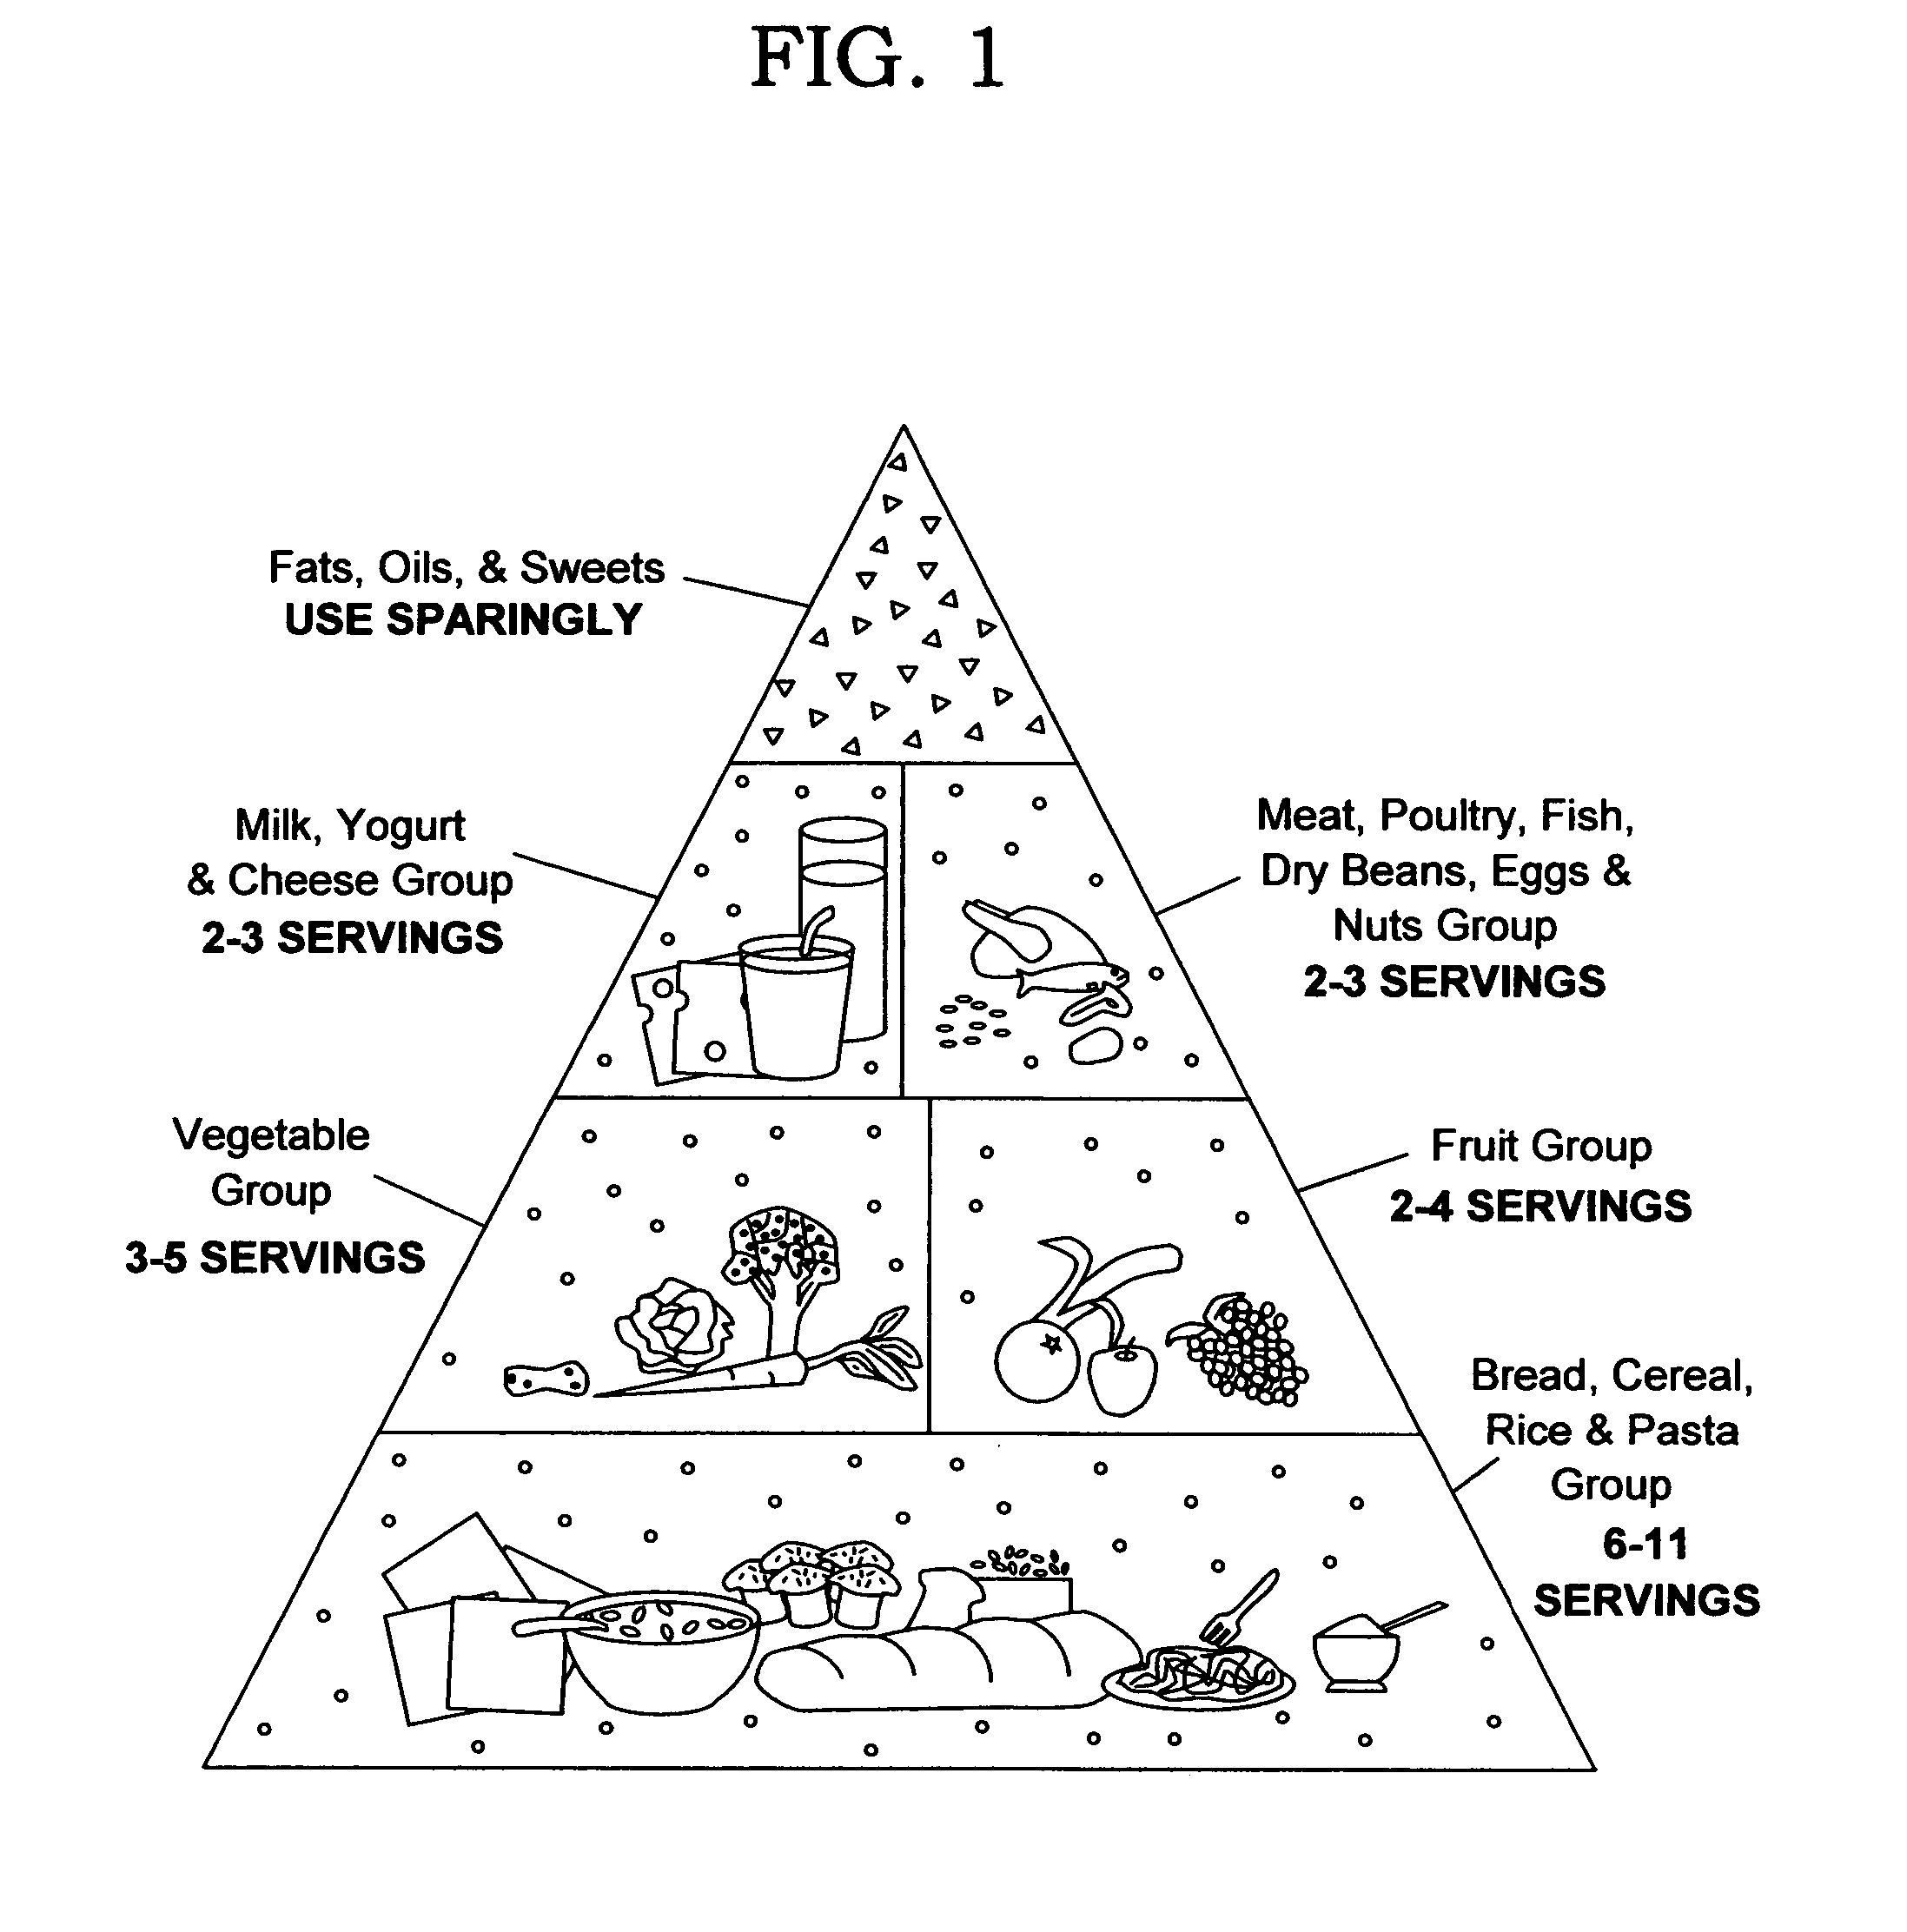 Method of identifying particular attributes of food products consistent with consumer needs and/or desires